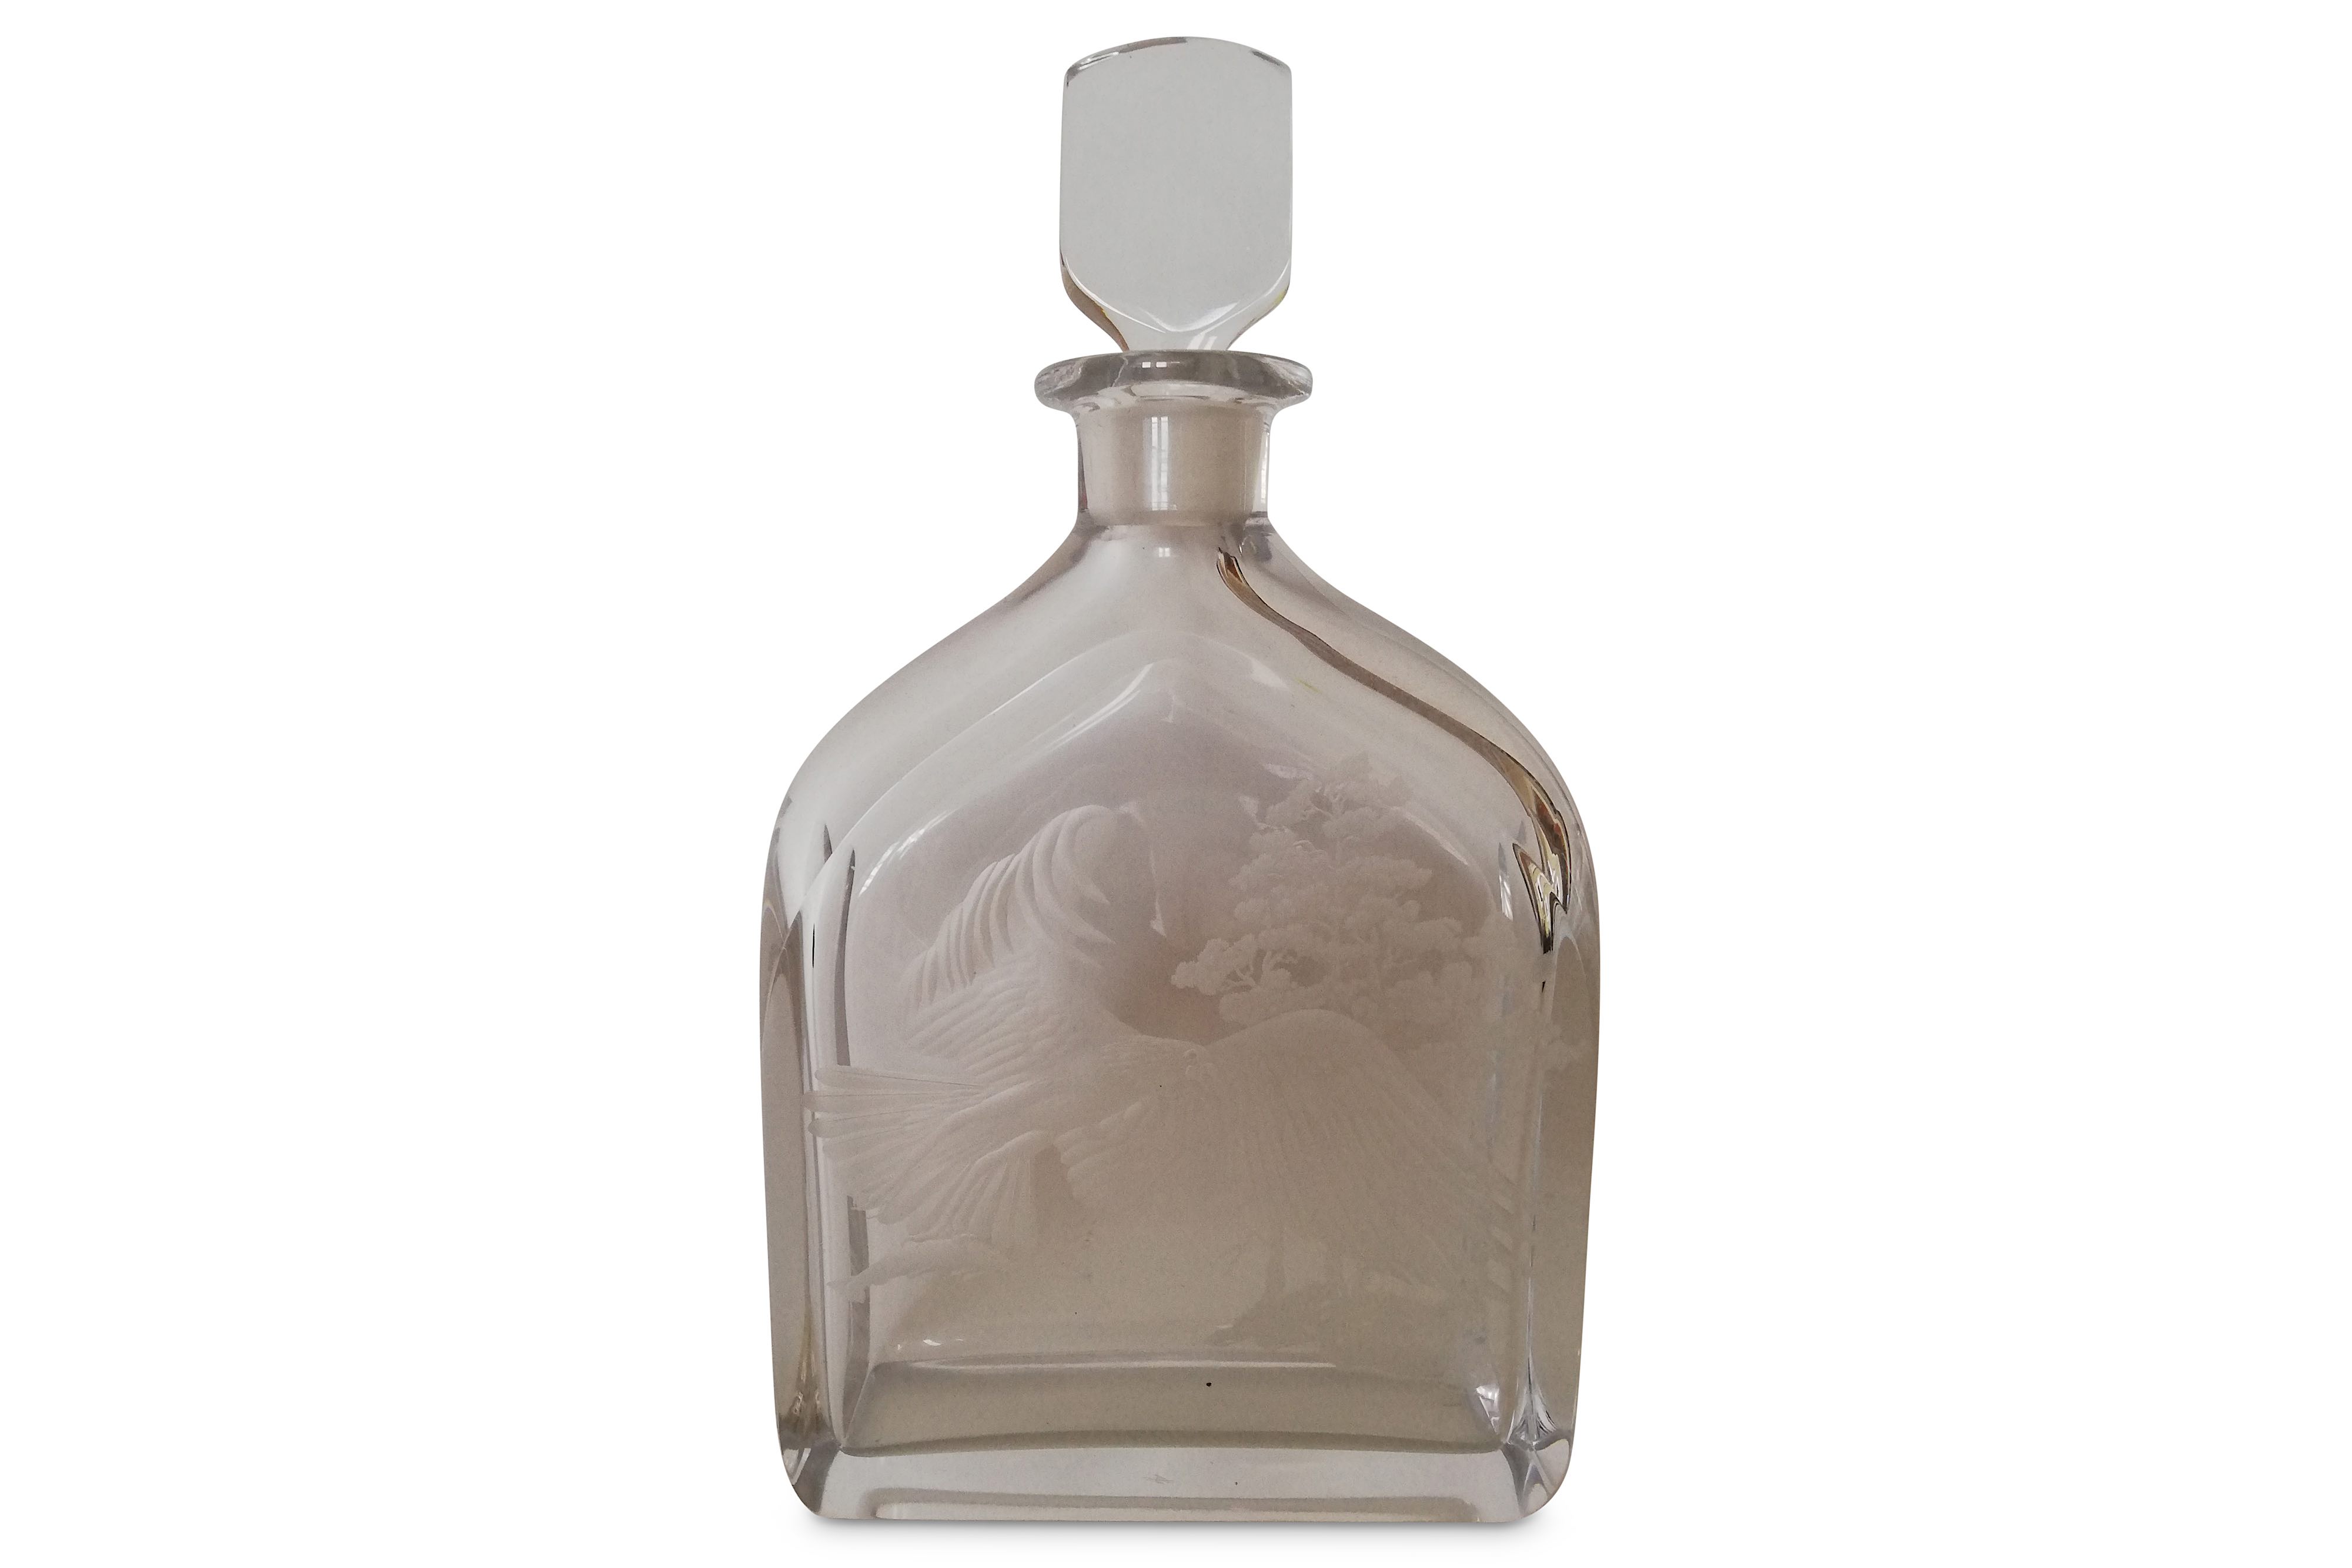 ORREFORS: An etched glass Eagle Decanter and Stopper